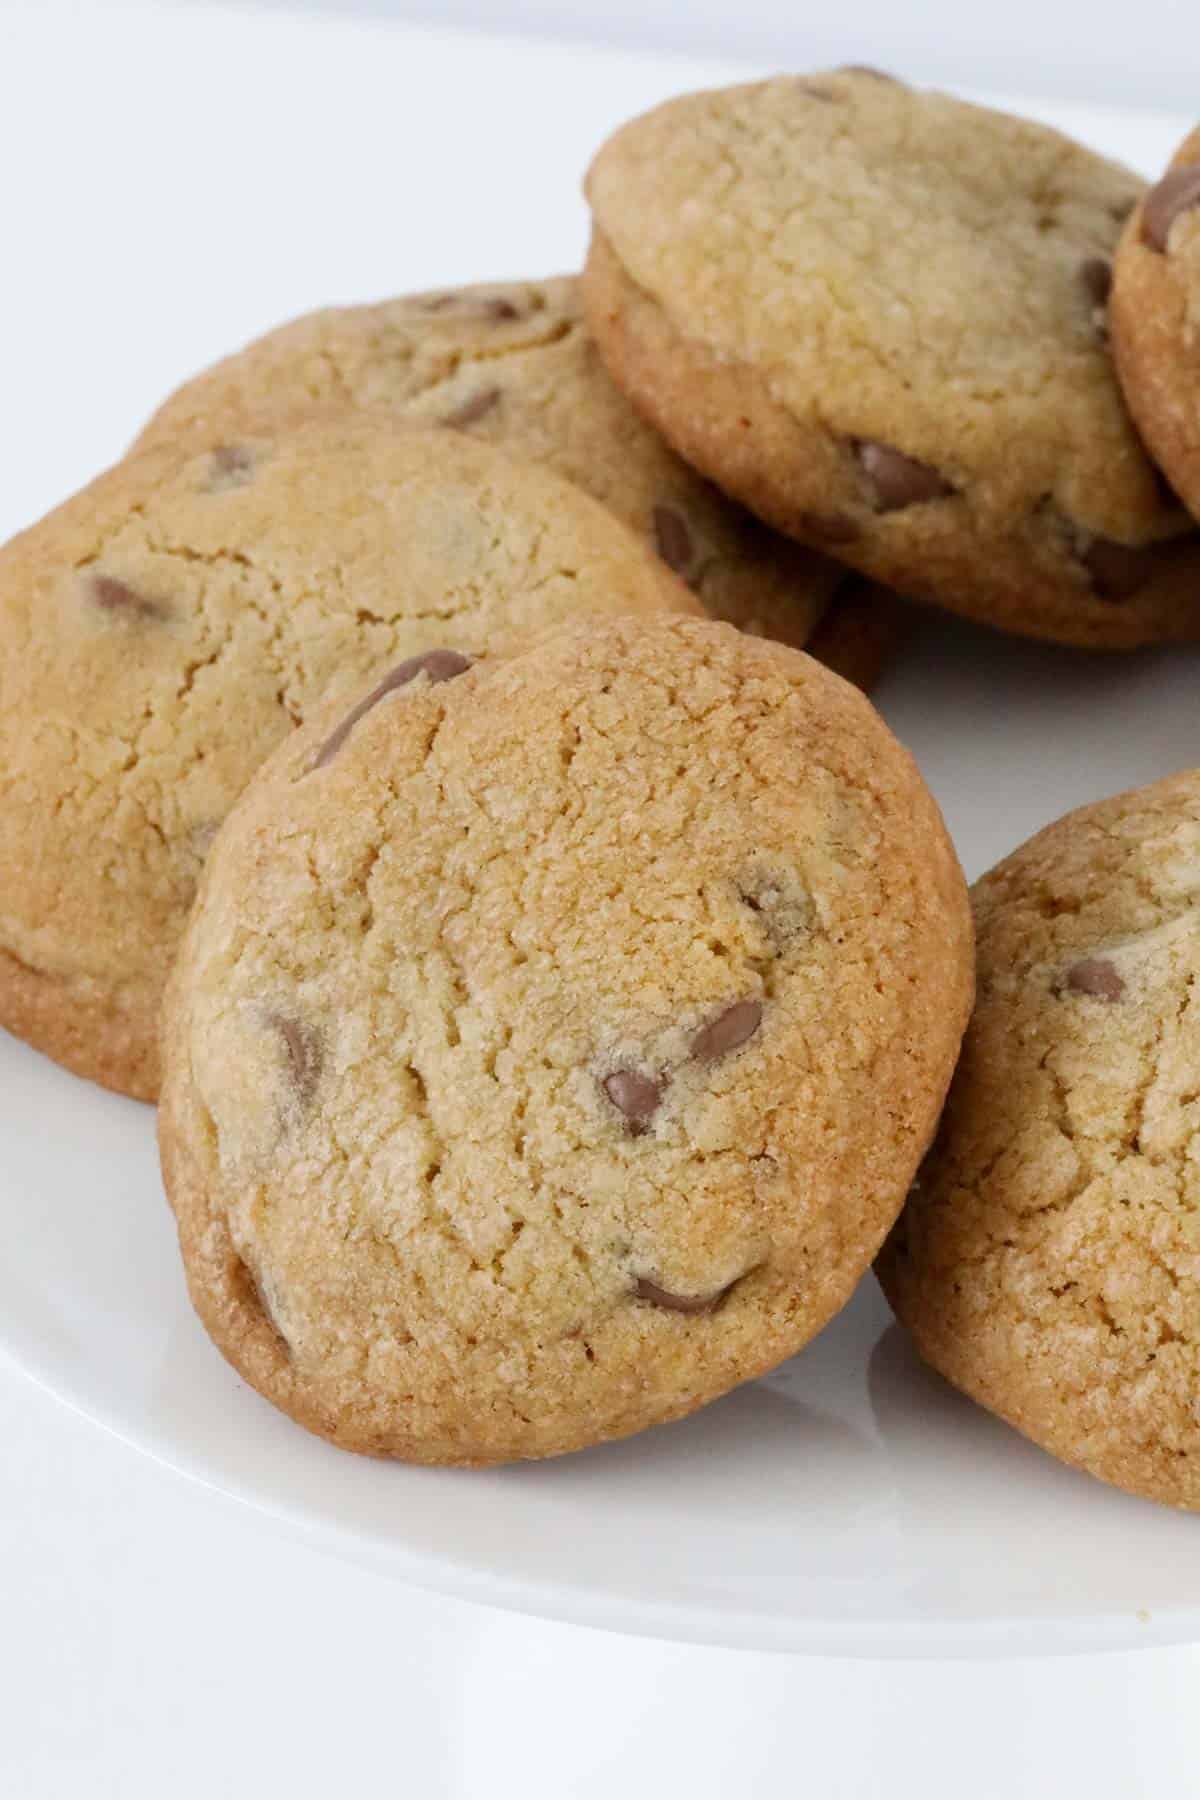 A baked cookie with chocolate chips throughout.